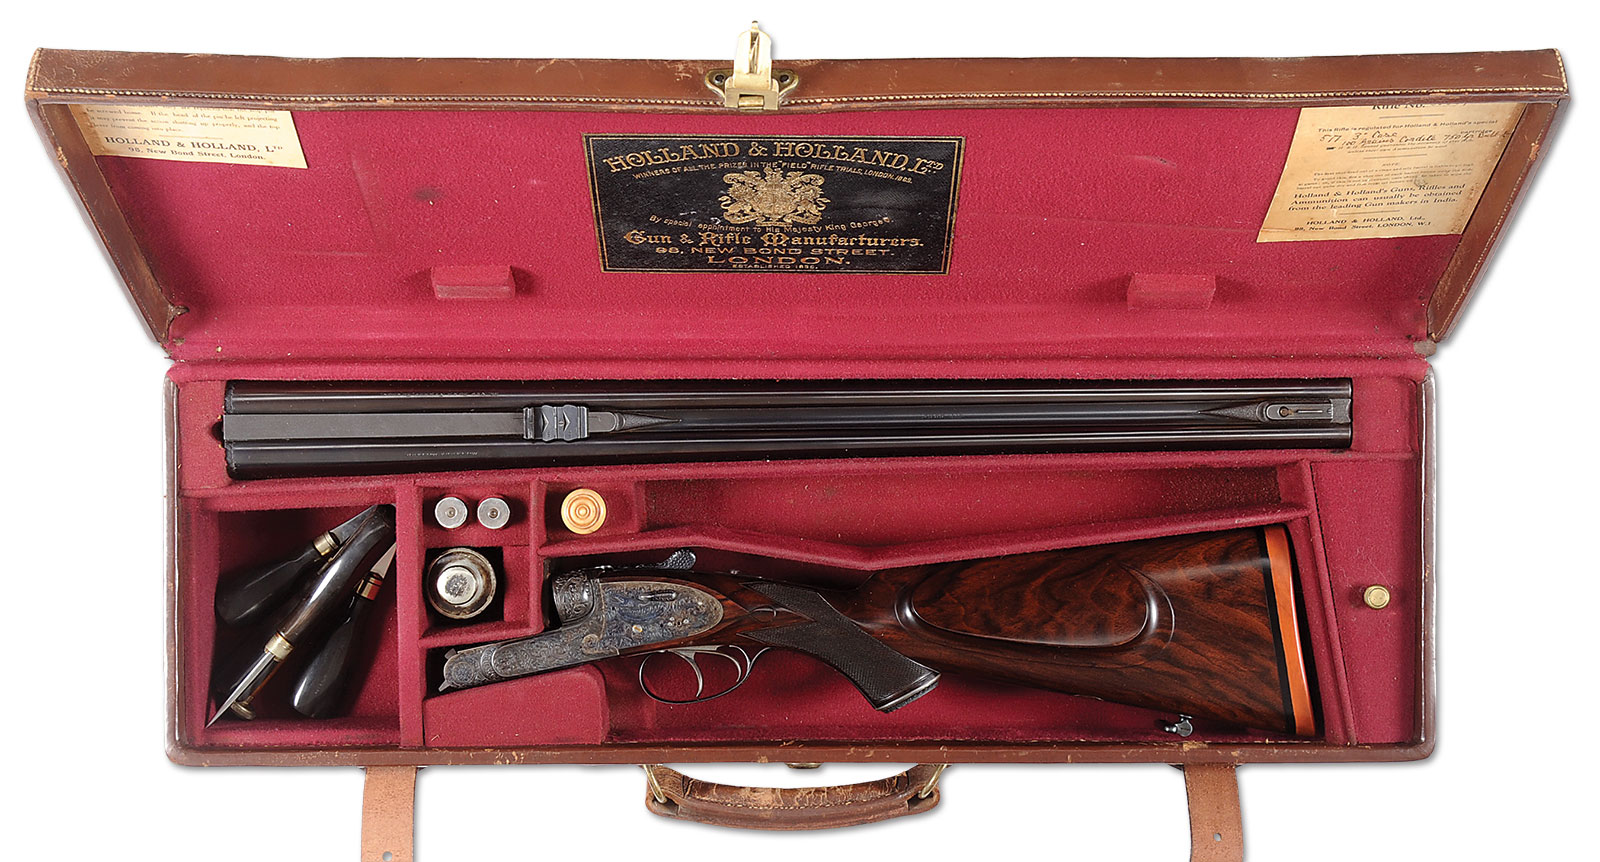 Golden Age Holland & Holland Royal Deluxe Hammerless Ejector Double Rifle Nitro Express made for his Highness Sir Ranjit Singhji; estimated at $60,000-100,000, sold for $115,000.